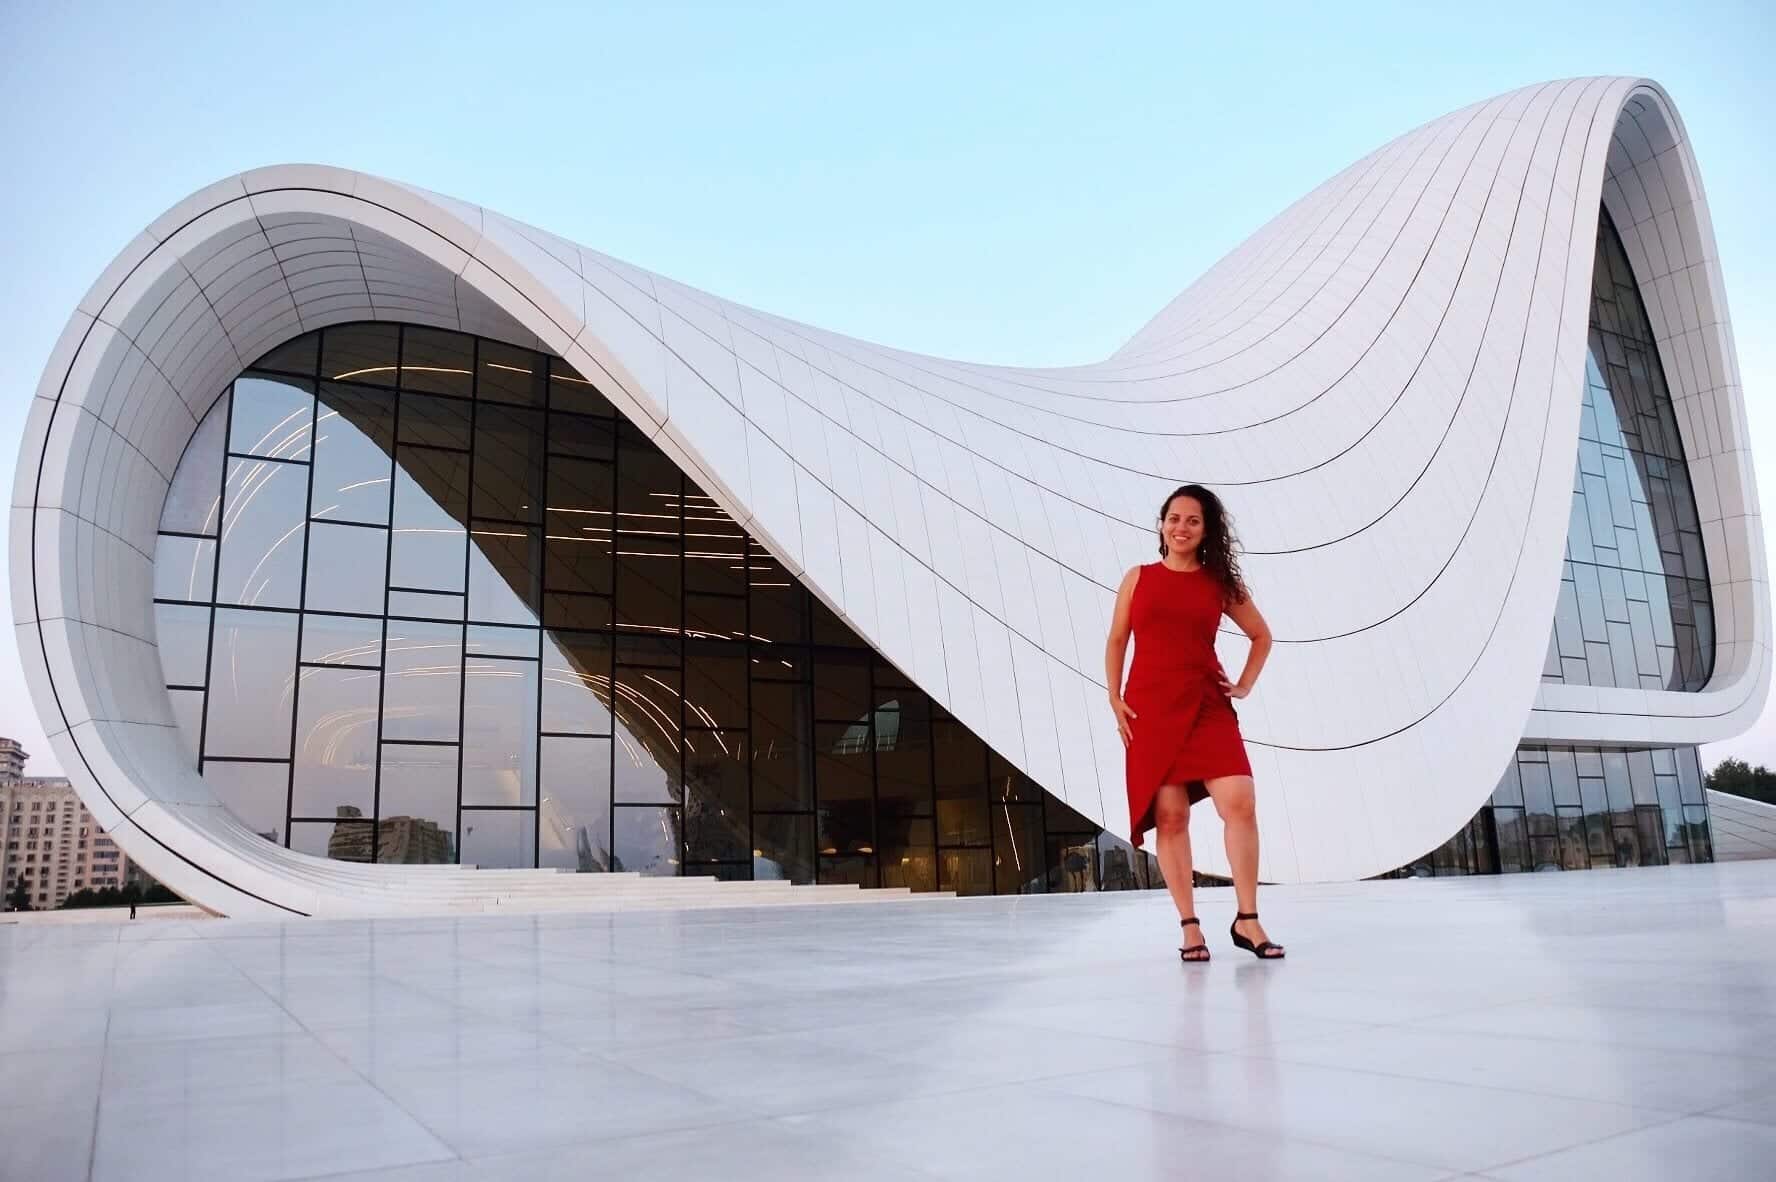 Kate stands in front of a modern building shaped like a sideways S, standing in a red dress.